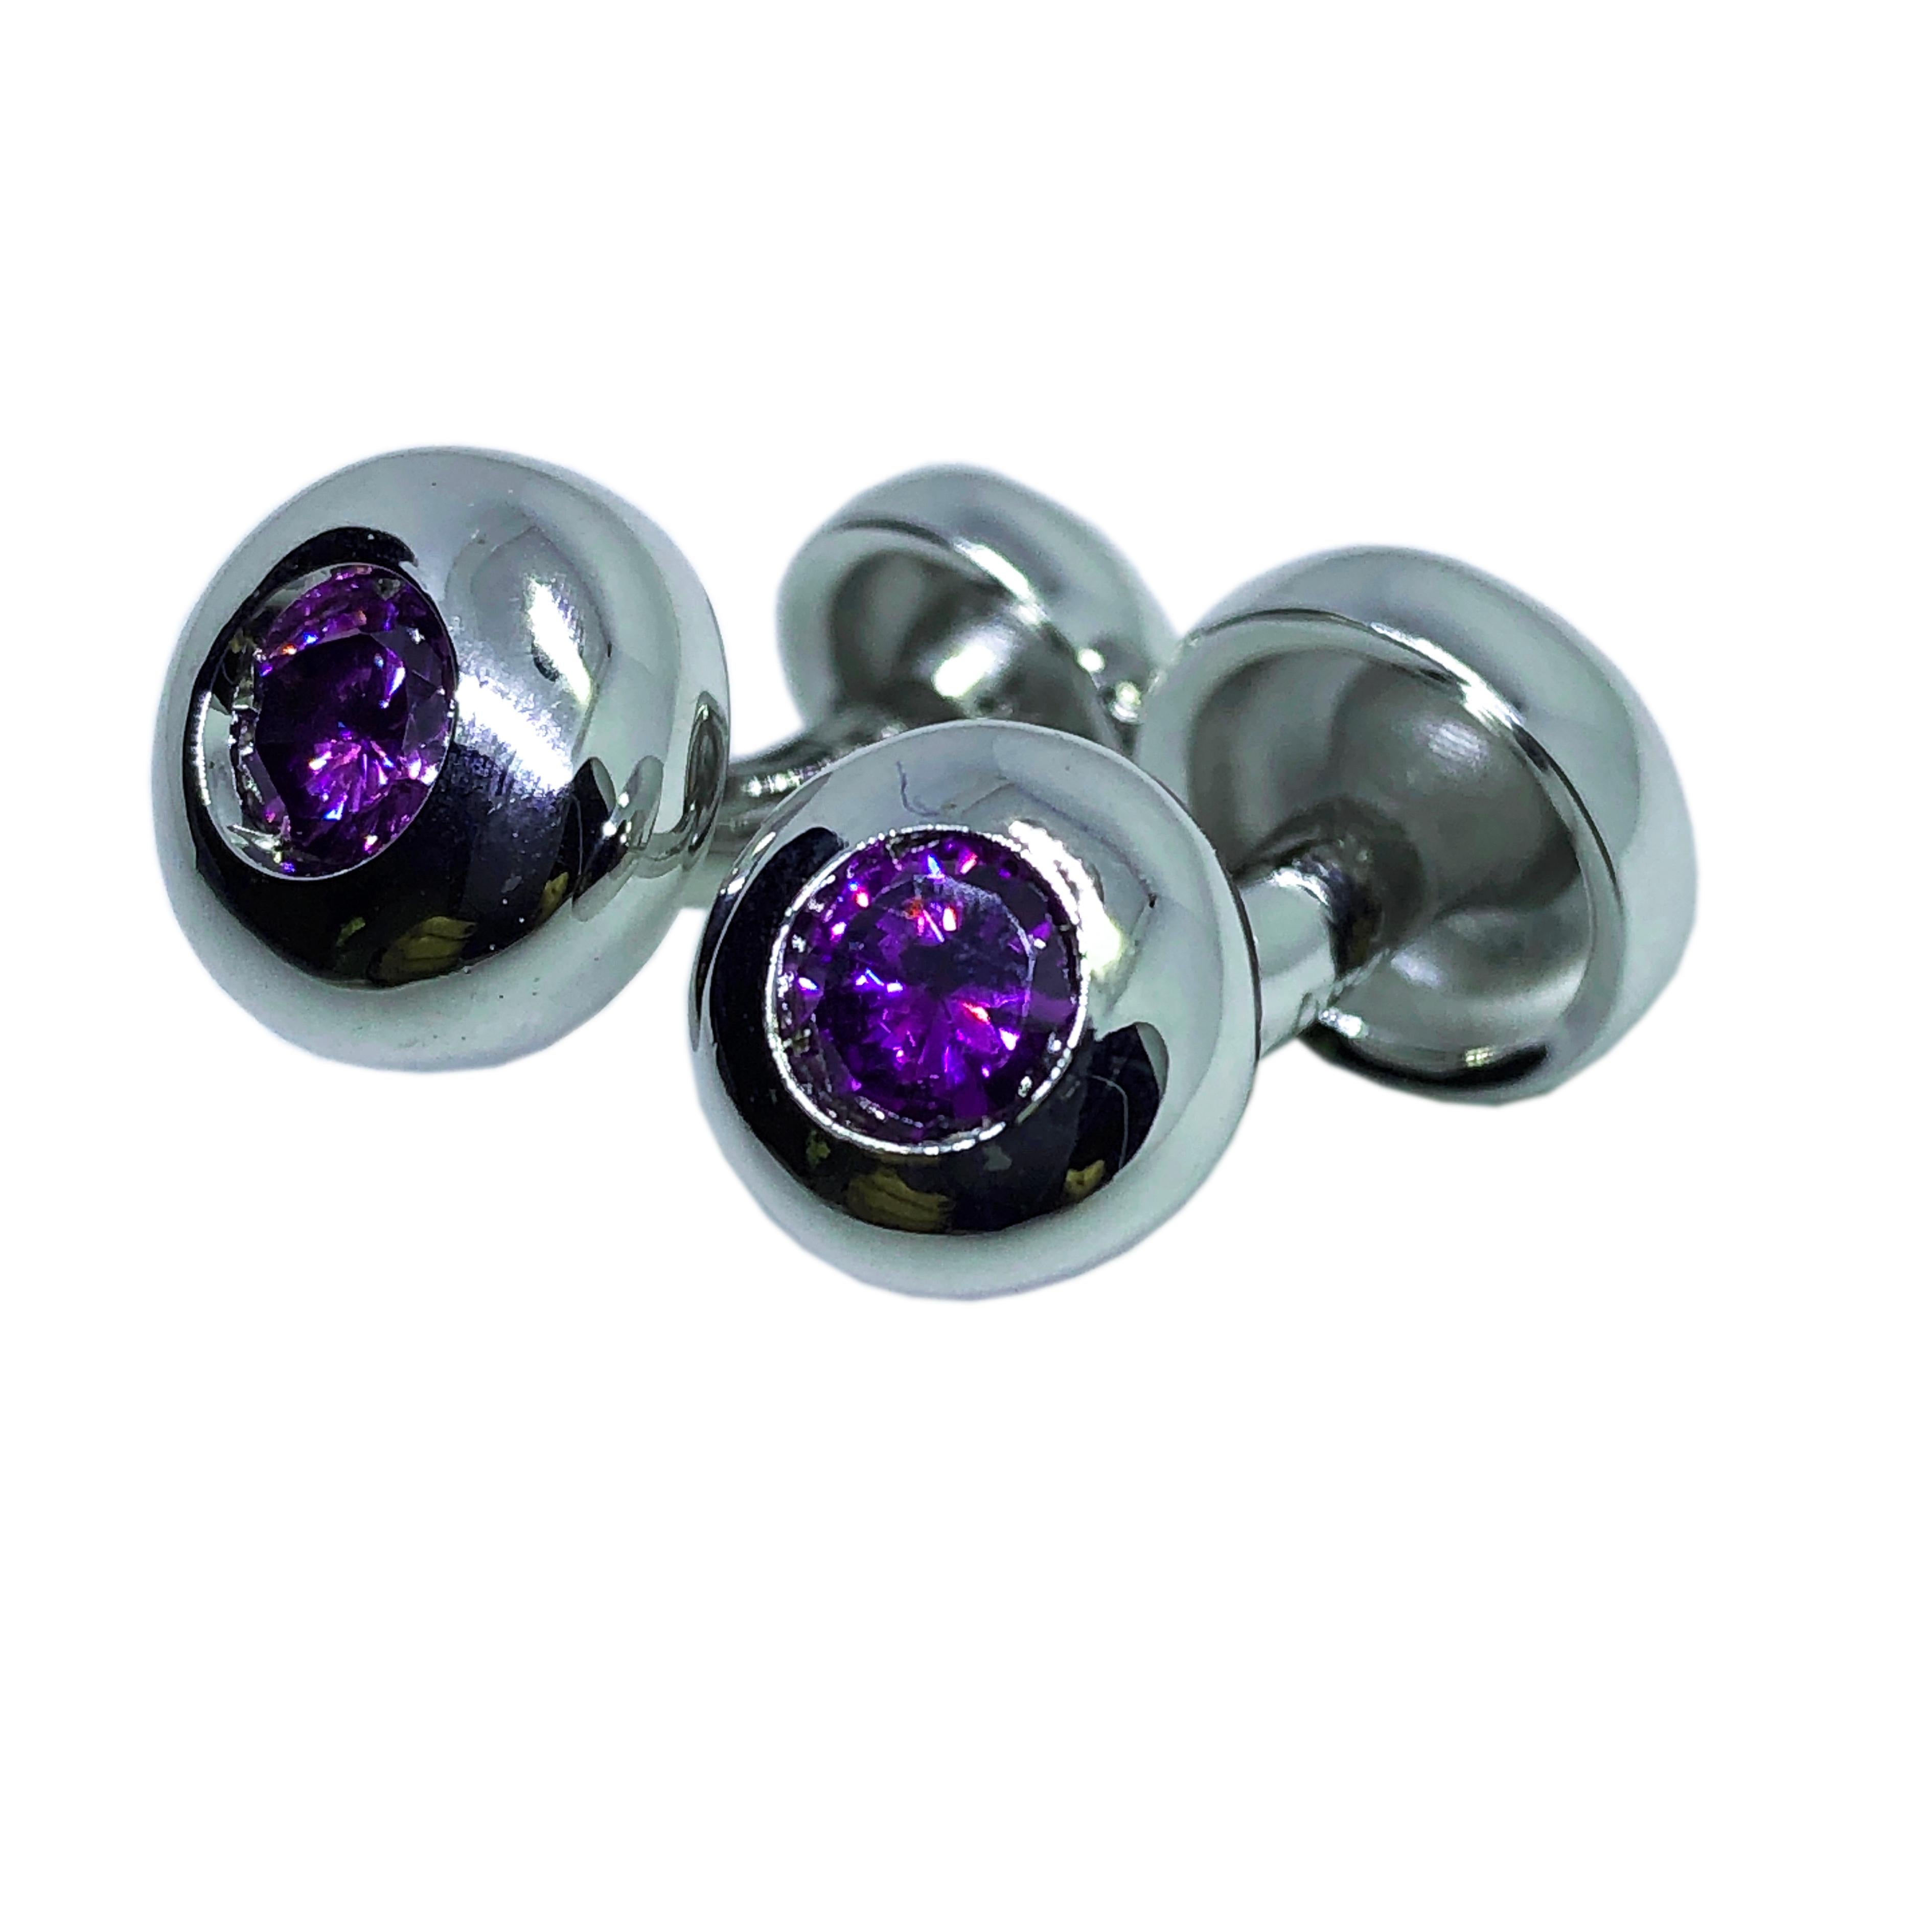 Chic yet Timeless Natural 2.90Kt Brilliant Cut Amethyst Solid Sterling Silver Cufflinks.
In our Smart Black Box and Pouch.